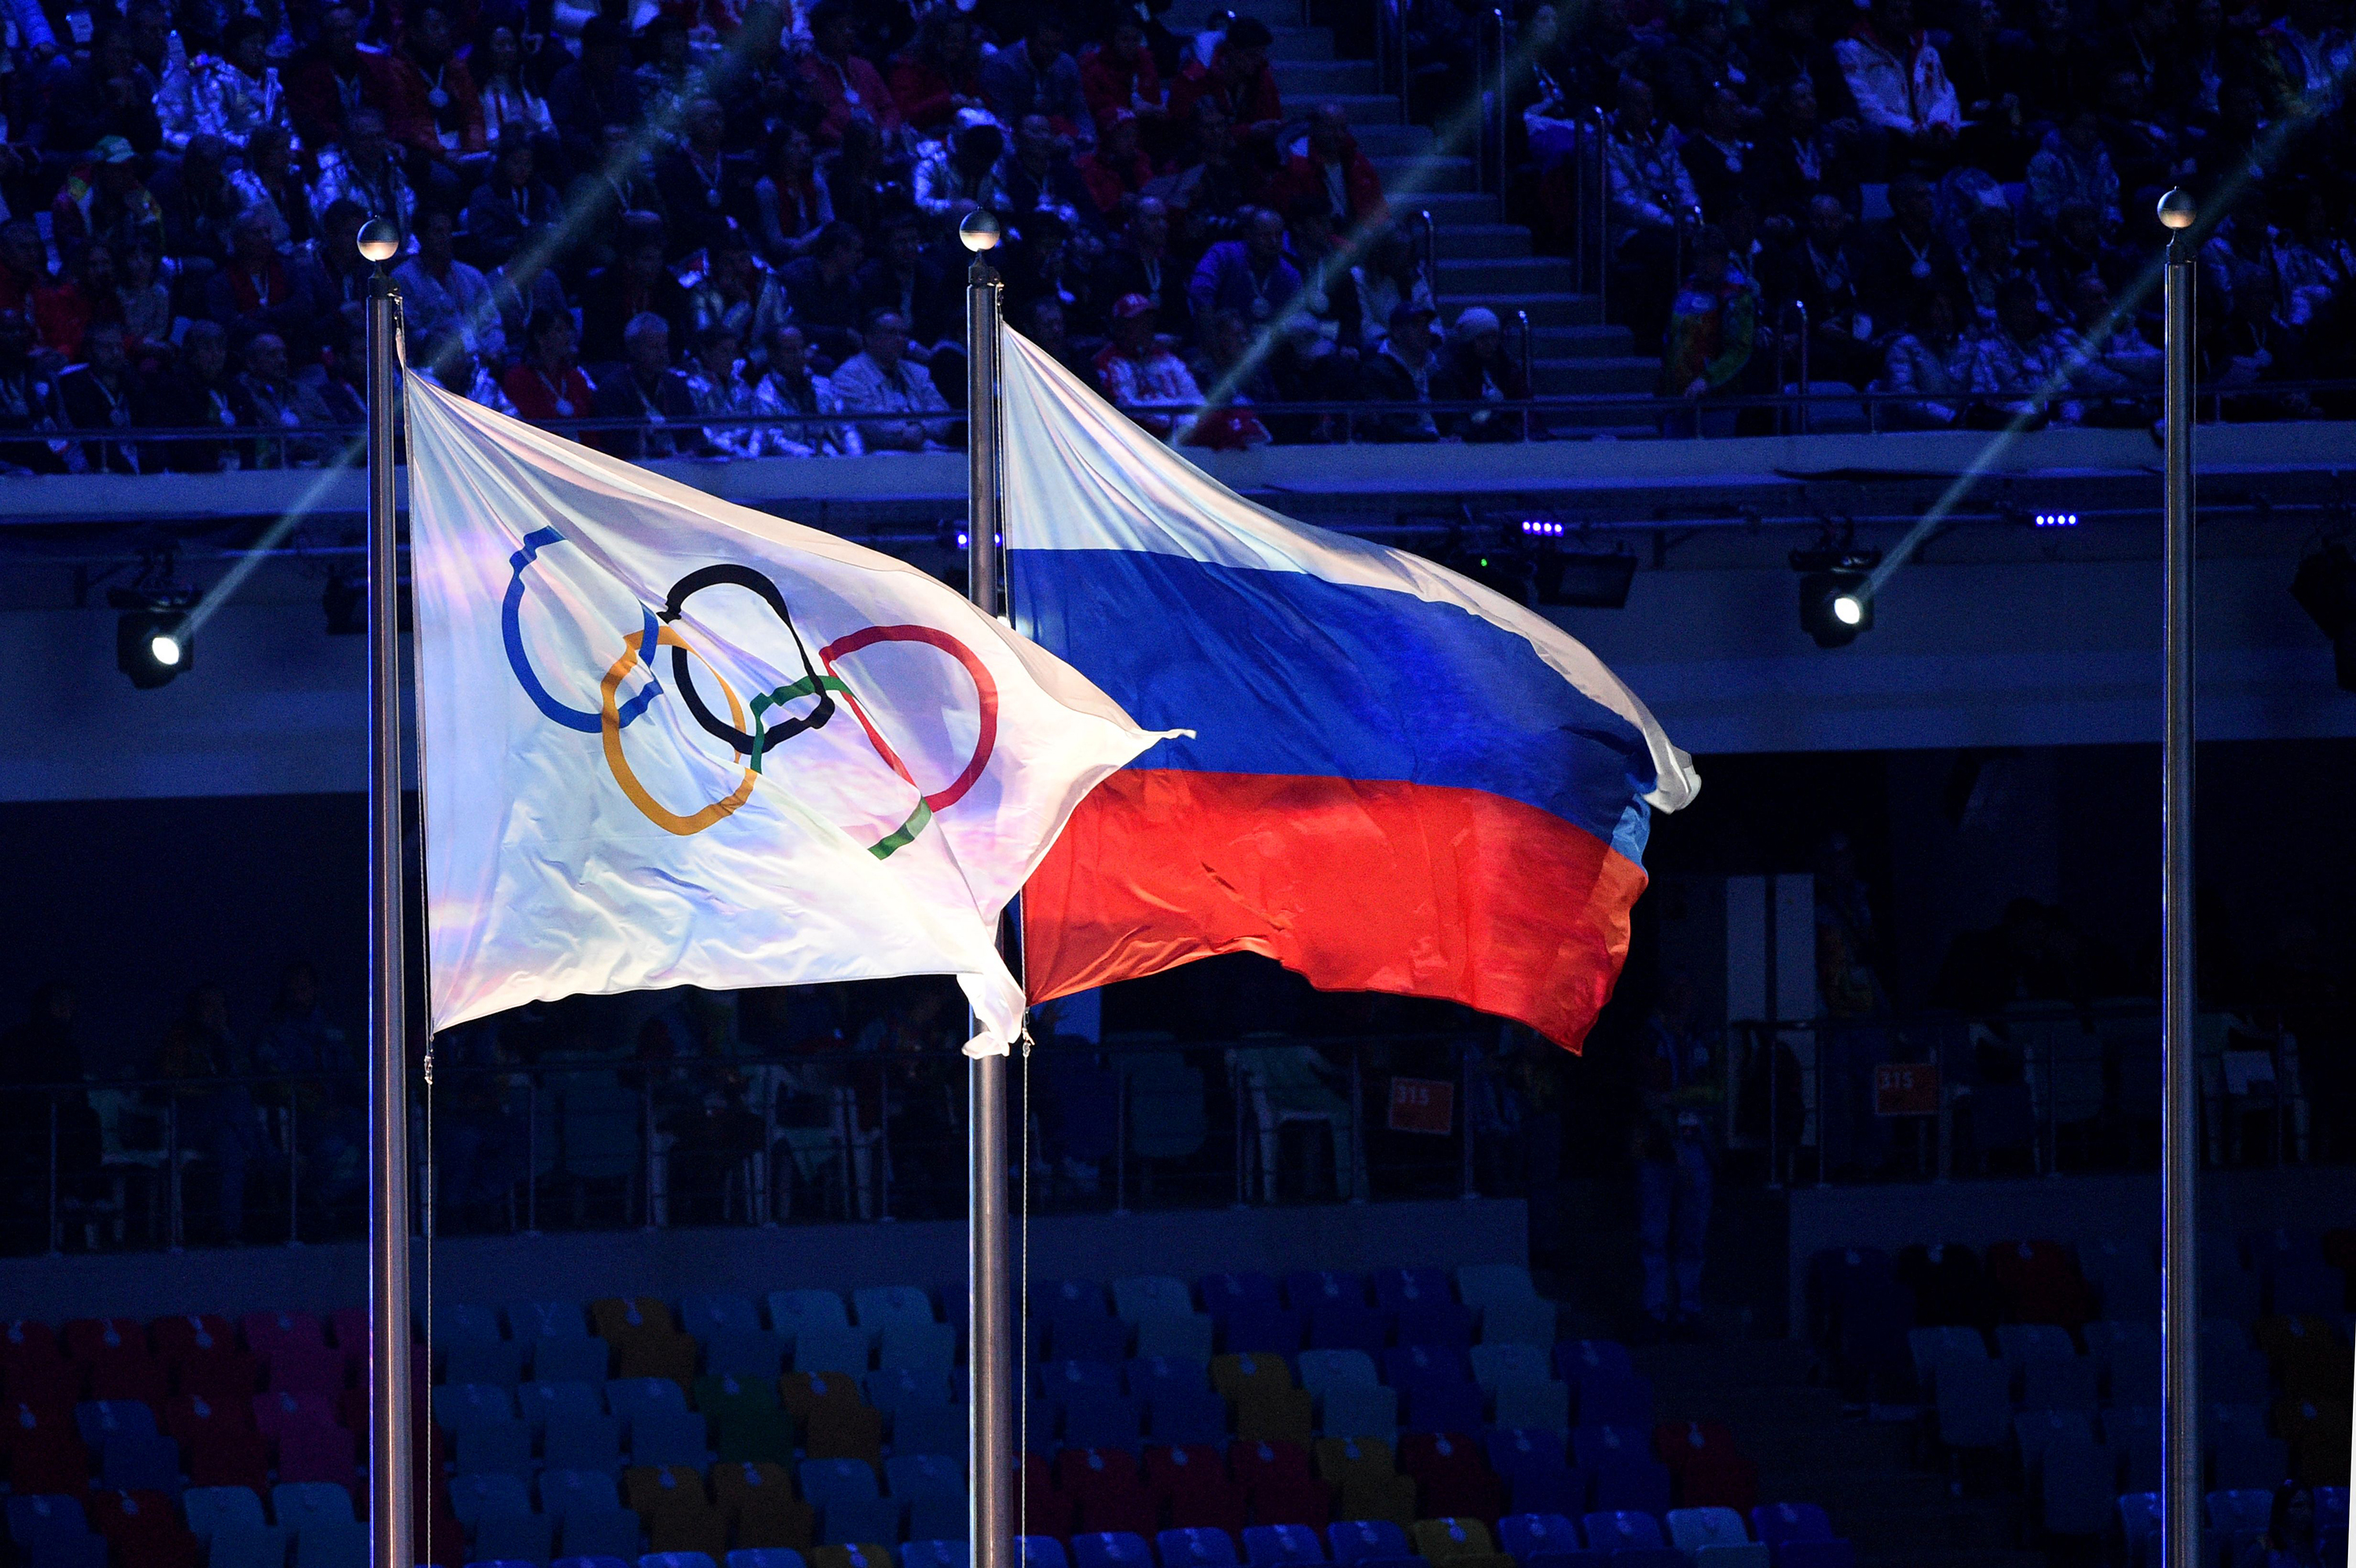 The Olympic and Russian flags fly during the closing ceremony of the Sochi Winter Olympics in Sochi, Russia in 2014.